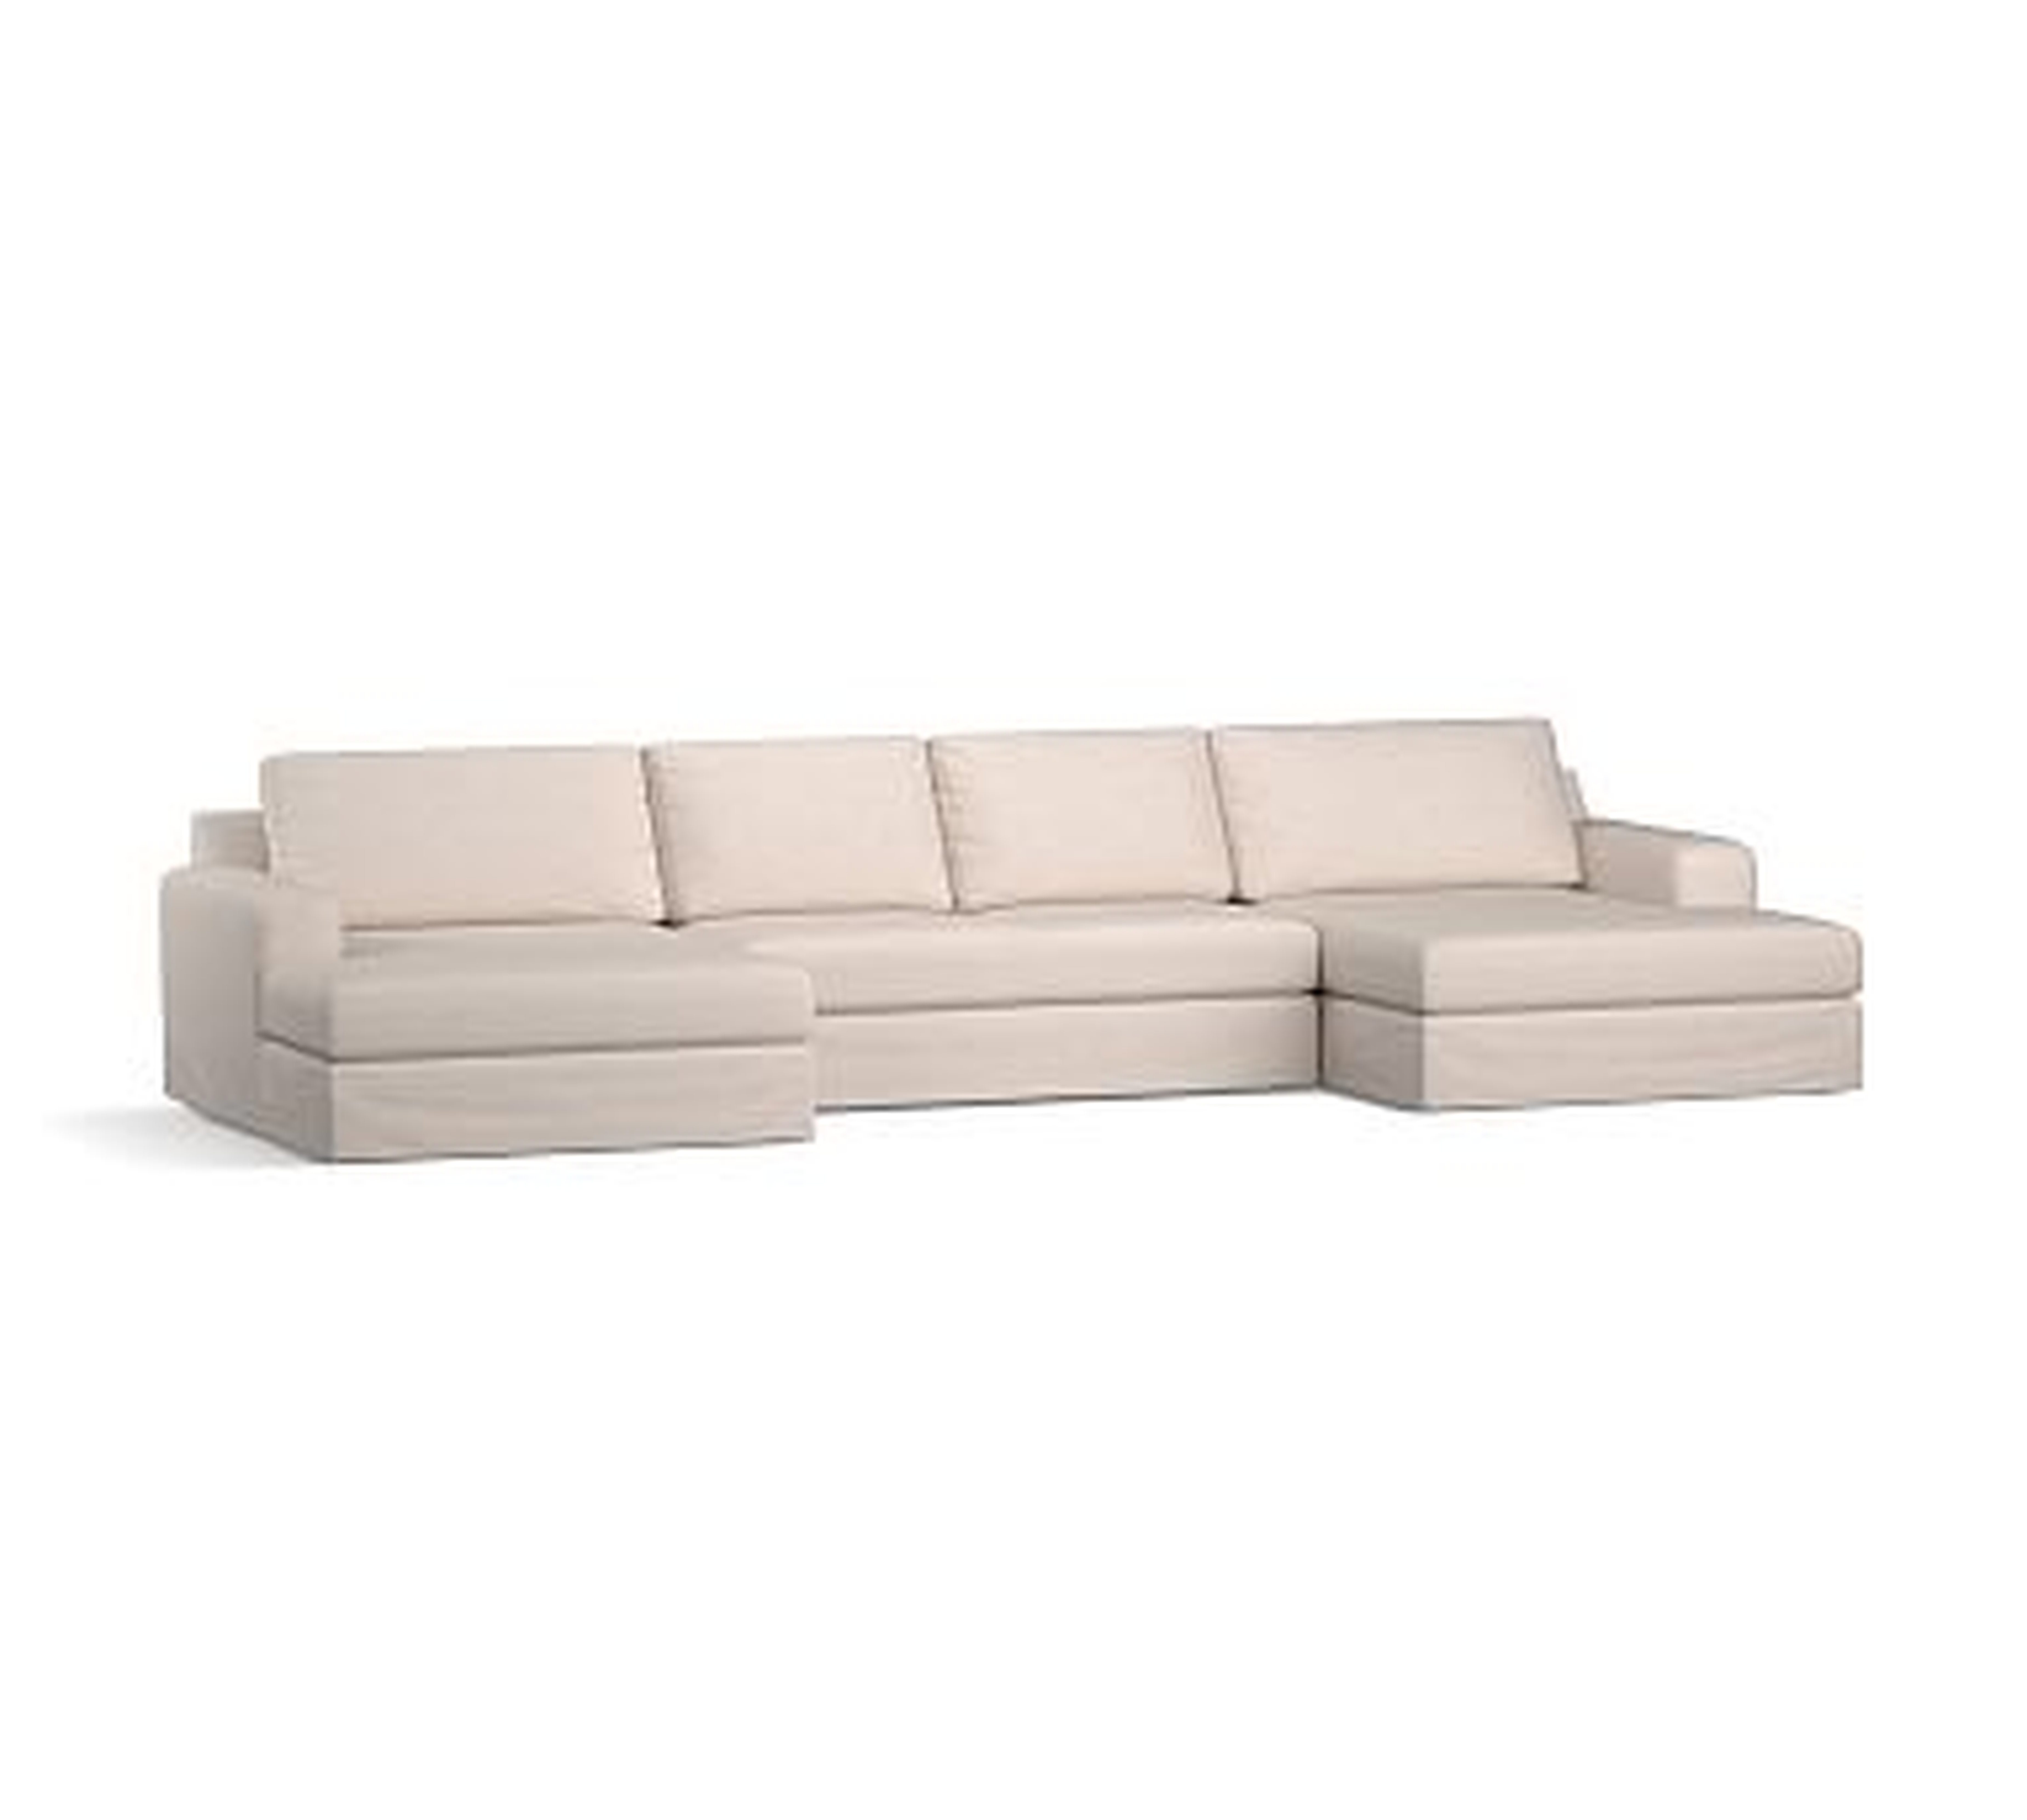 Big Sur Square Arm Slipcovered U-Double Chaise Loveseat Sectional with Bench Cushion, Down Blend Wrapped Cushions, Sunbrella(R) Performance Slub Tweed Pebble - Pottery Barn